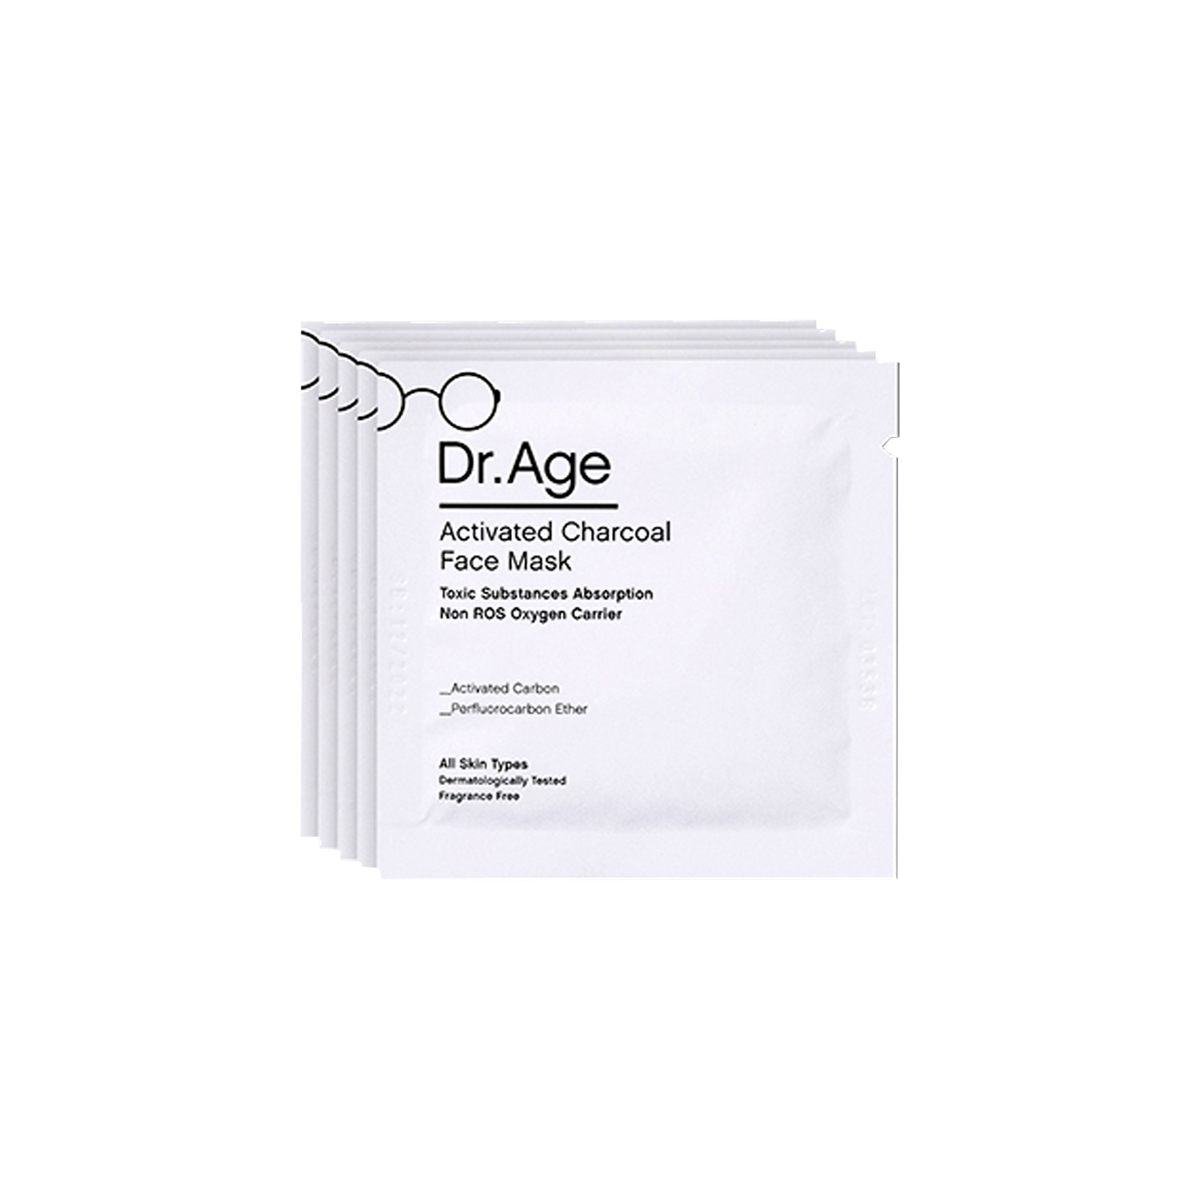 Dr. Age - Activated Charcoal Face Mask